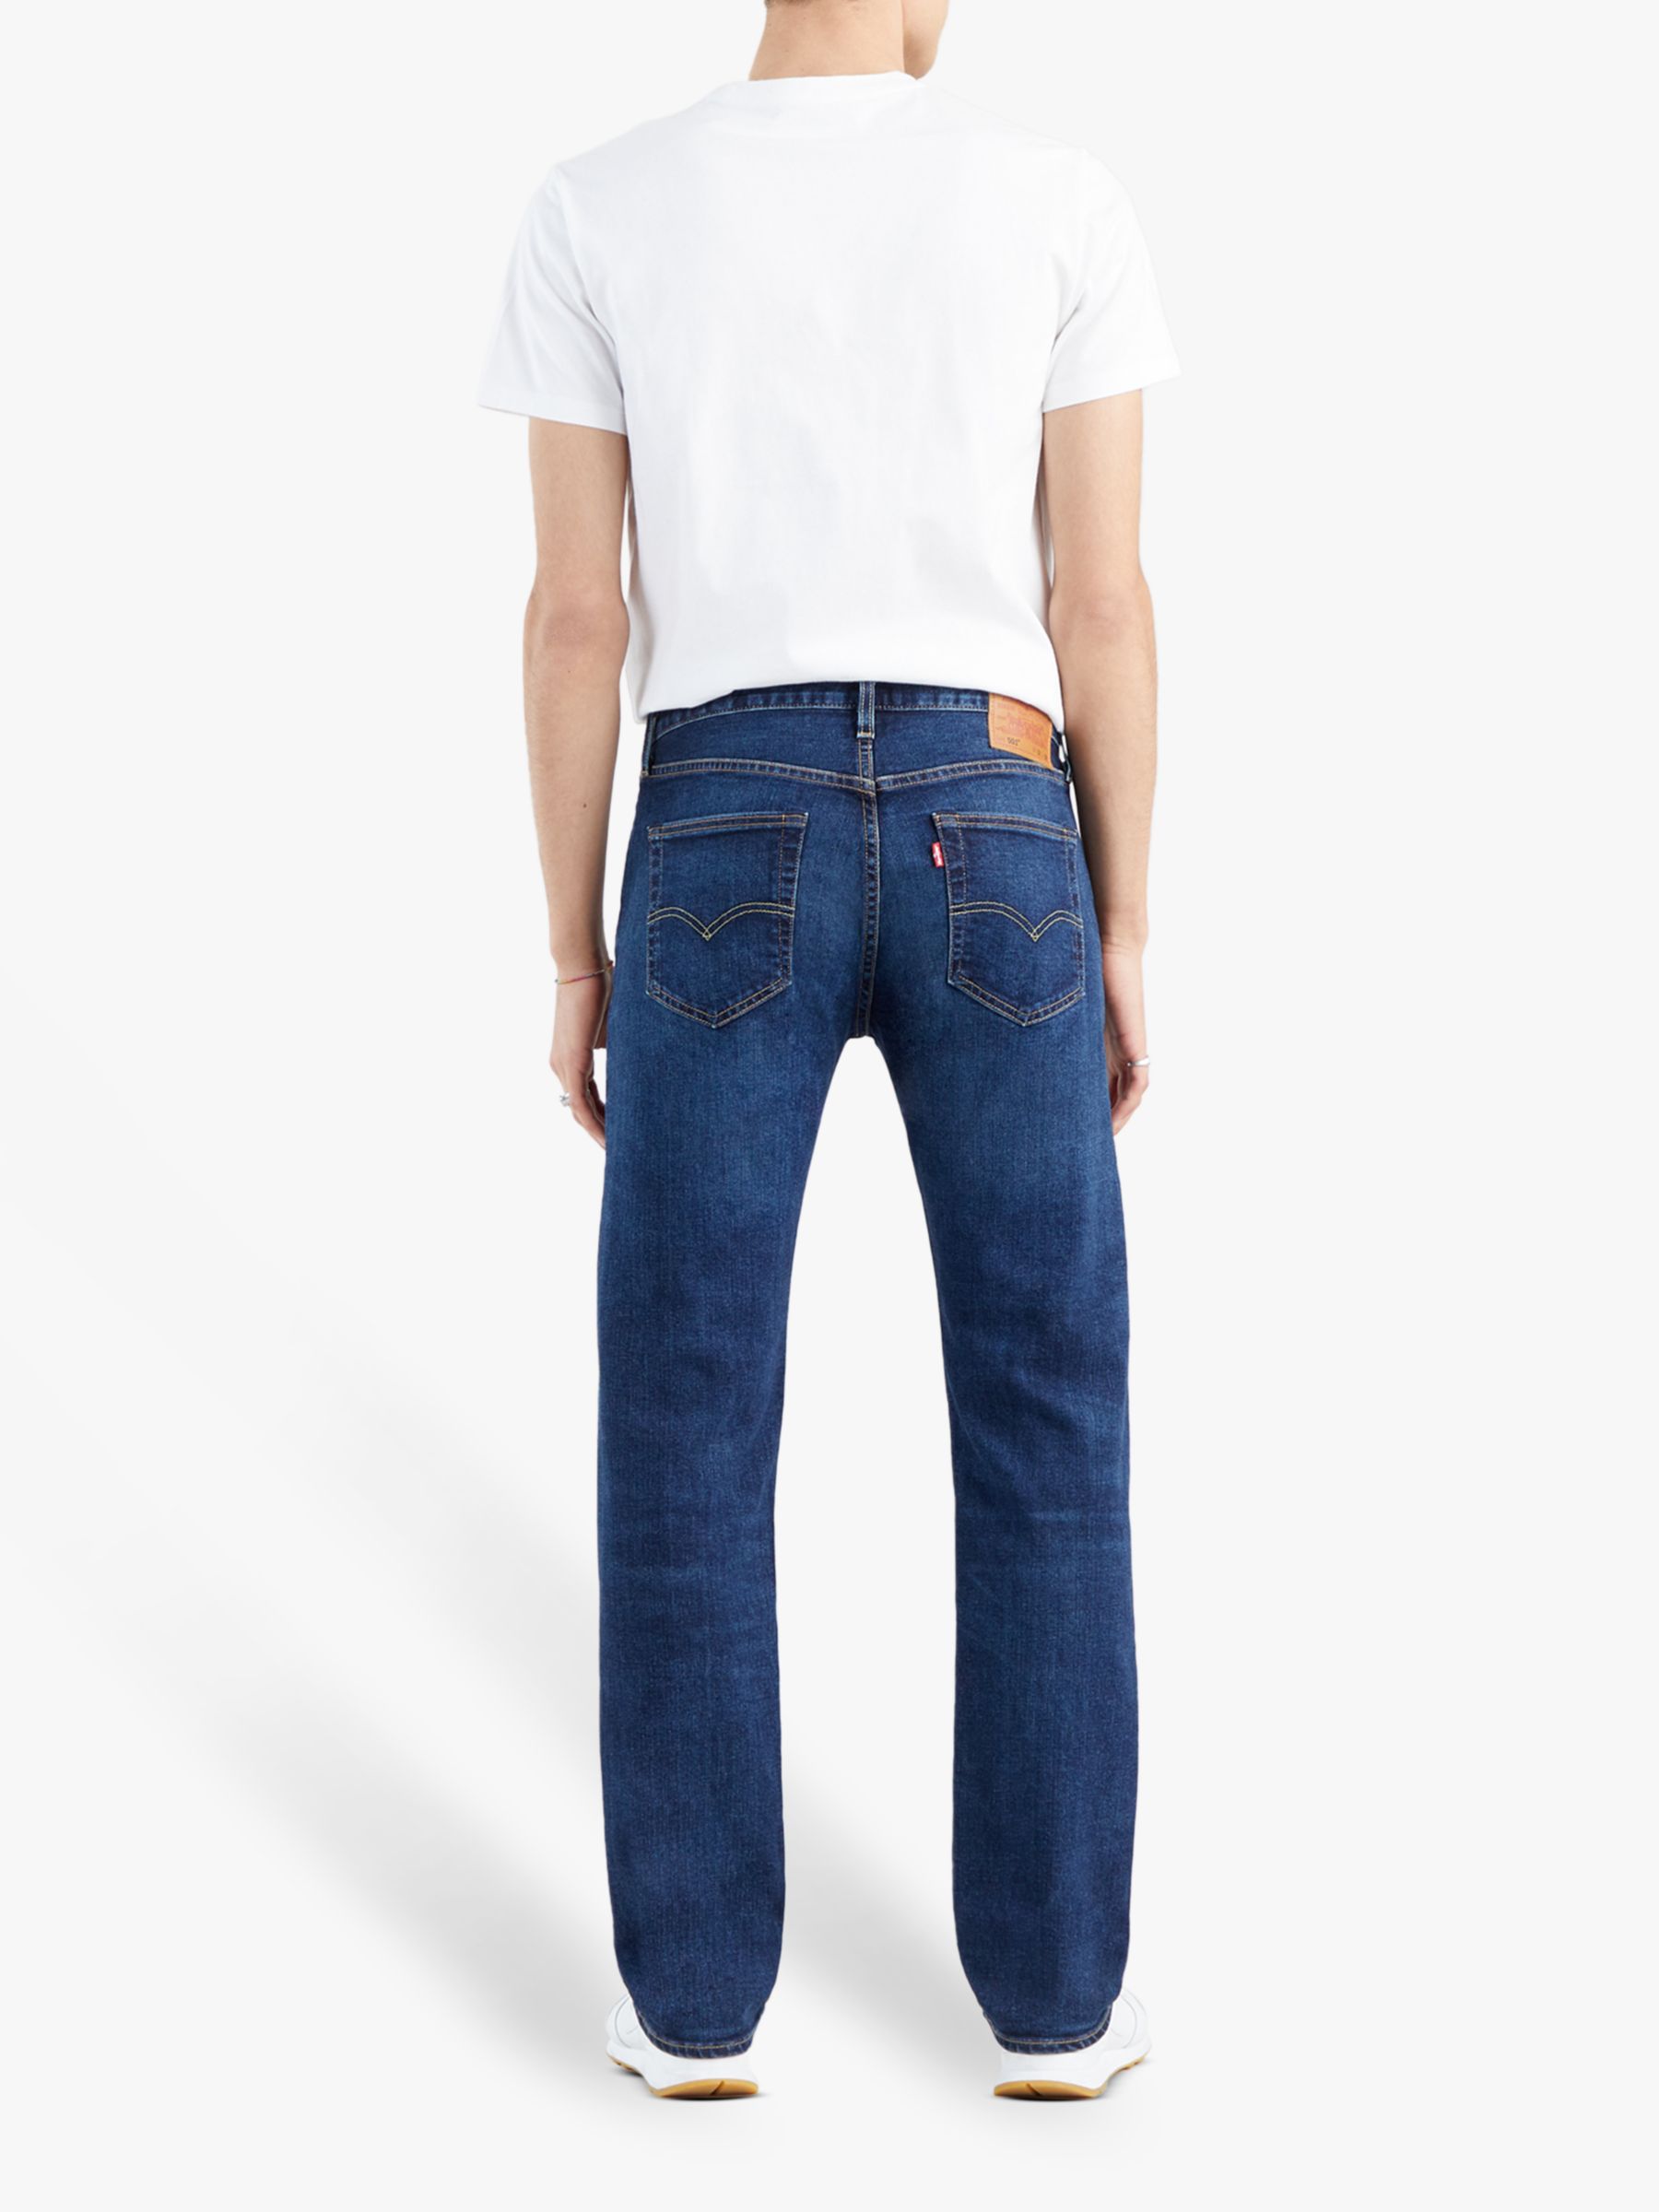 Levi's 501 Original Straight Jeans, Do The Rump at John Lewis & Partners